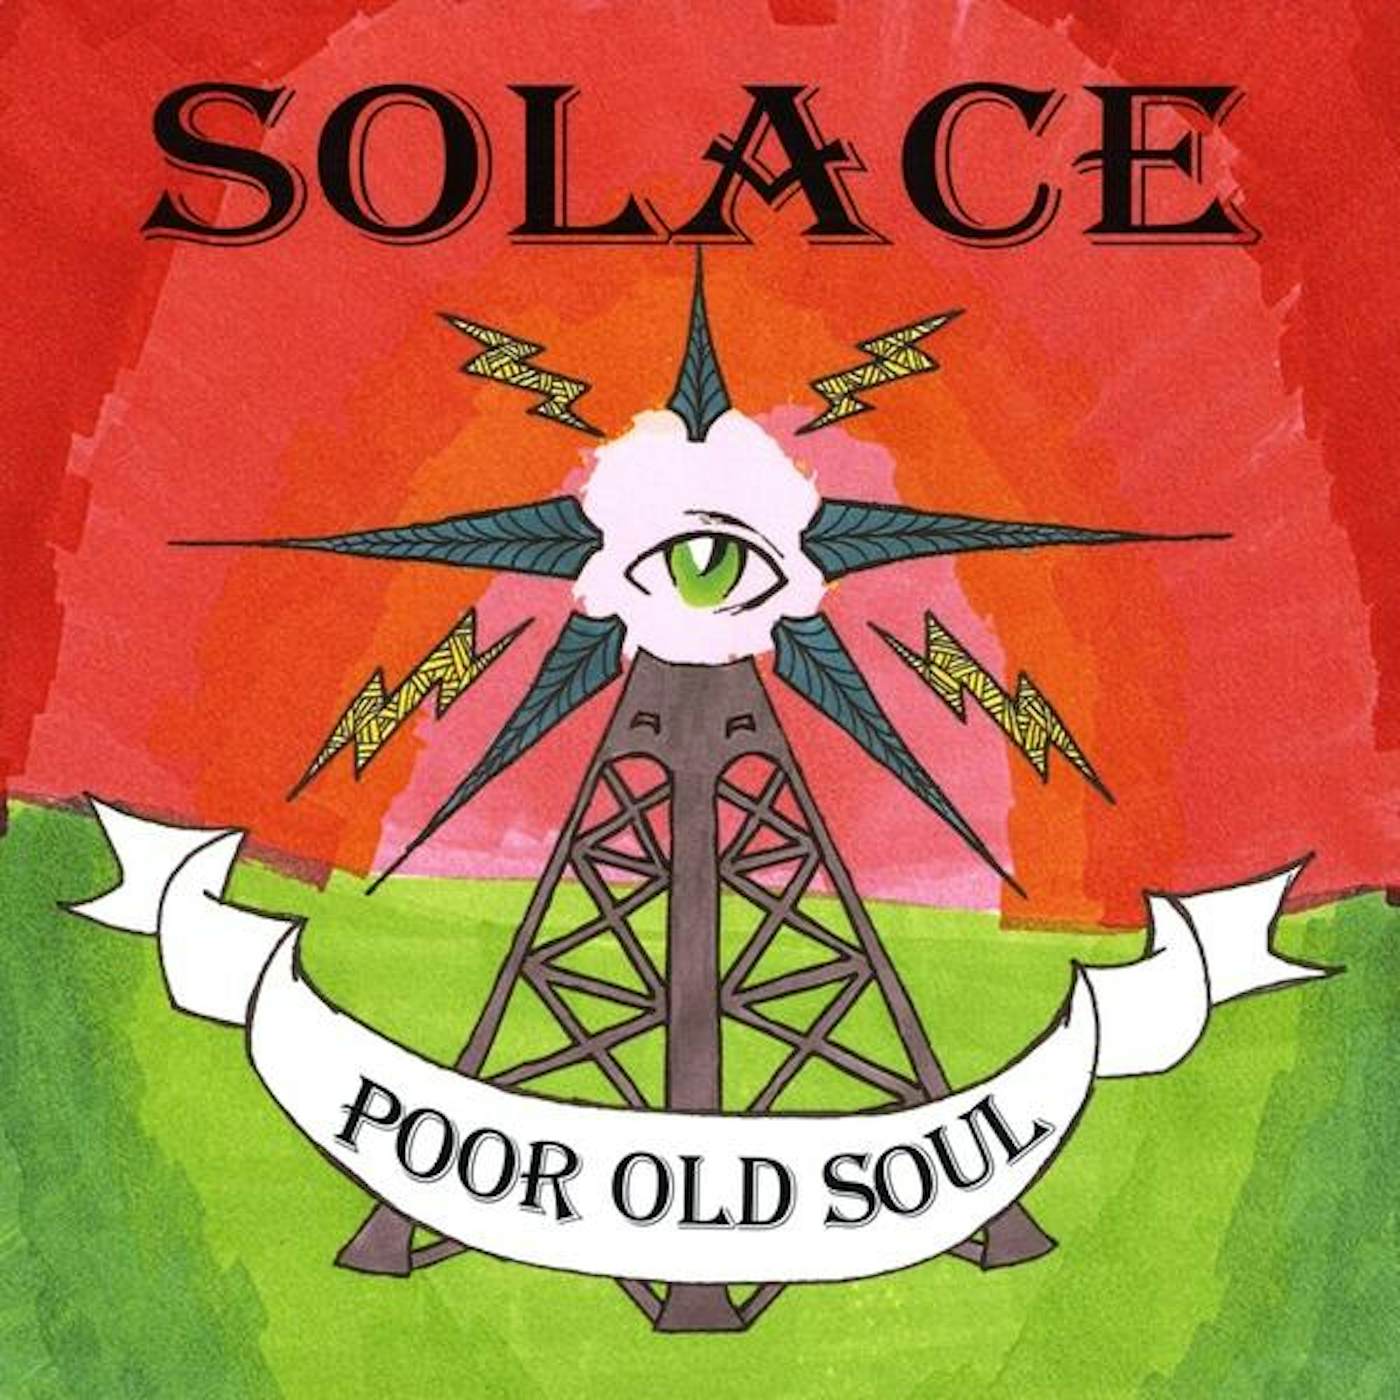 Solace POOR OLD SOUL CD